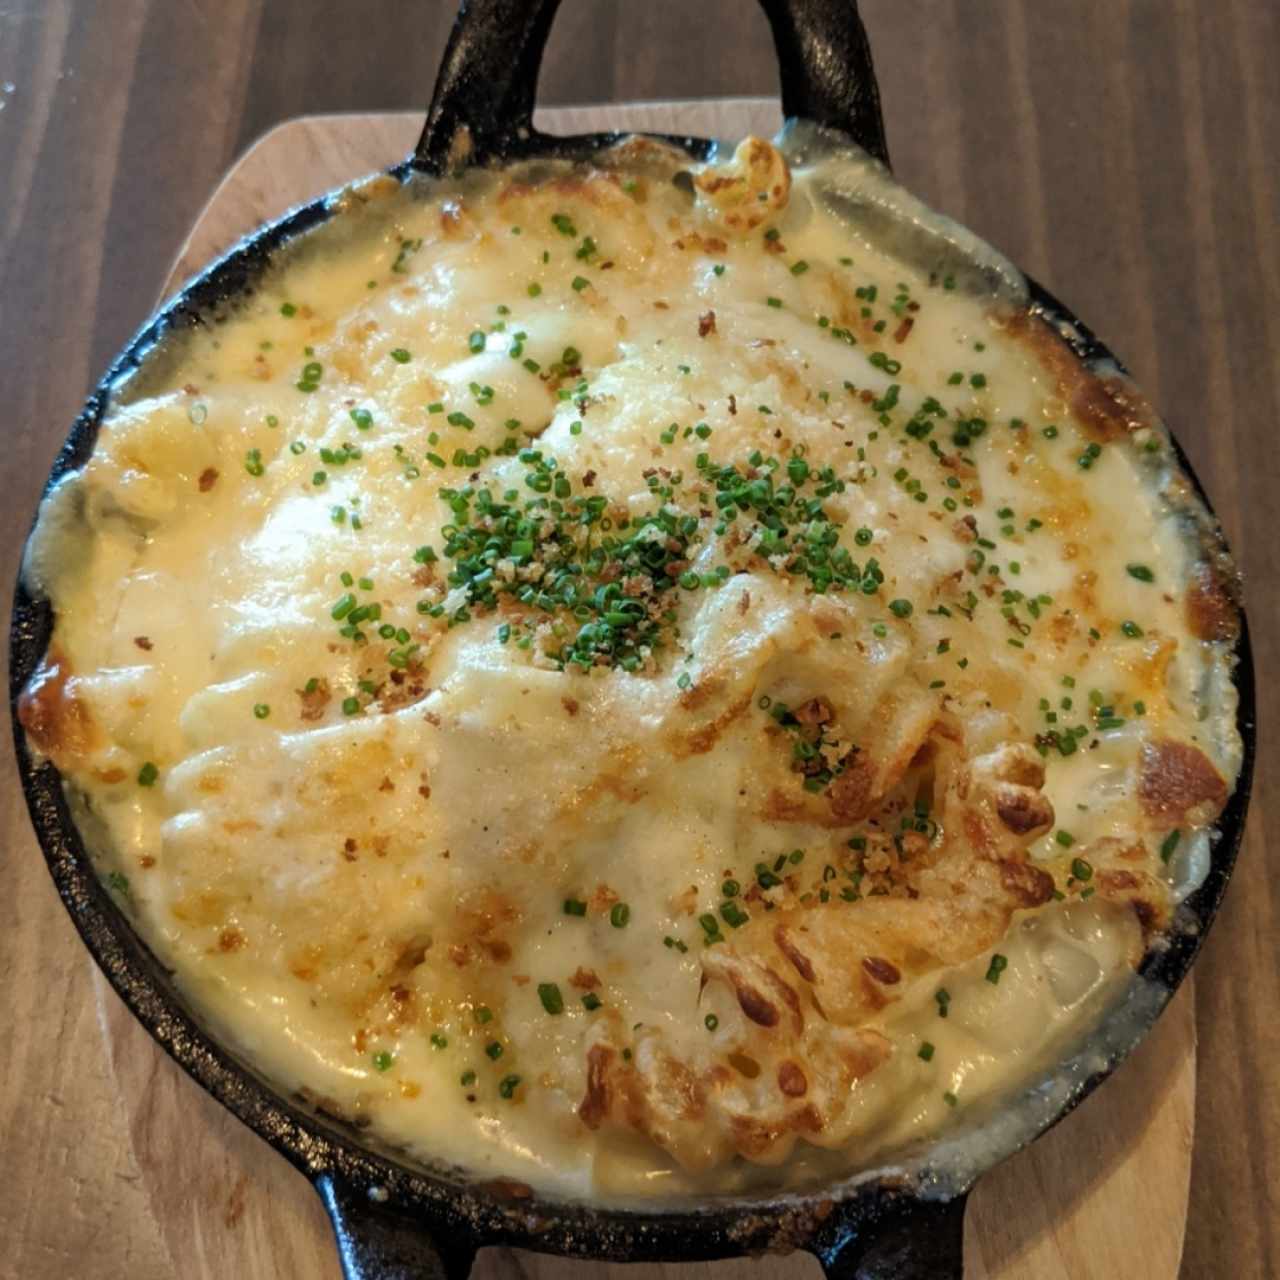 Mac and cheese casserole